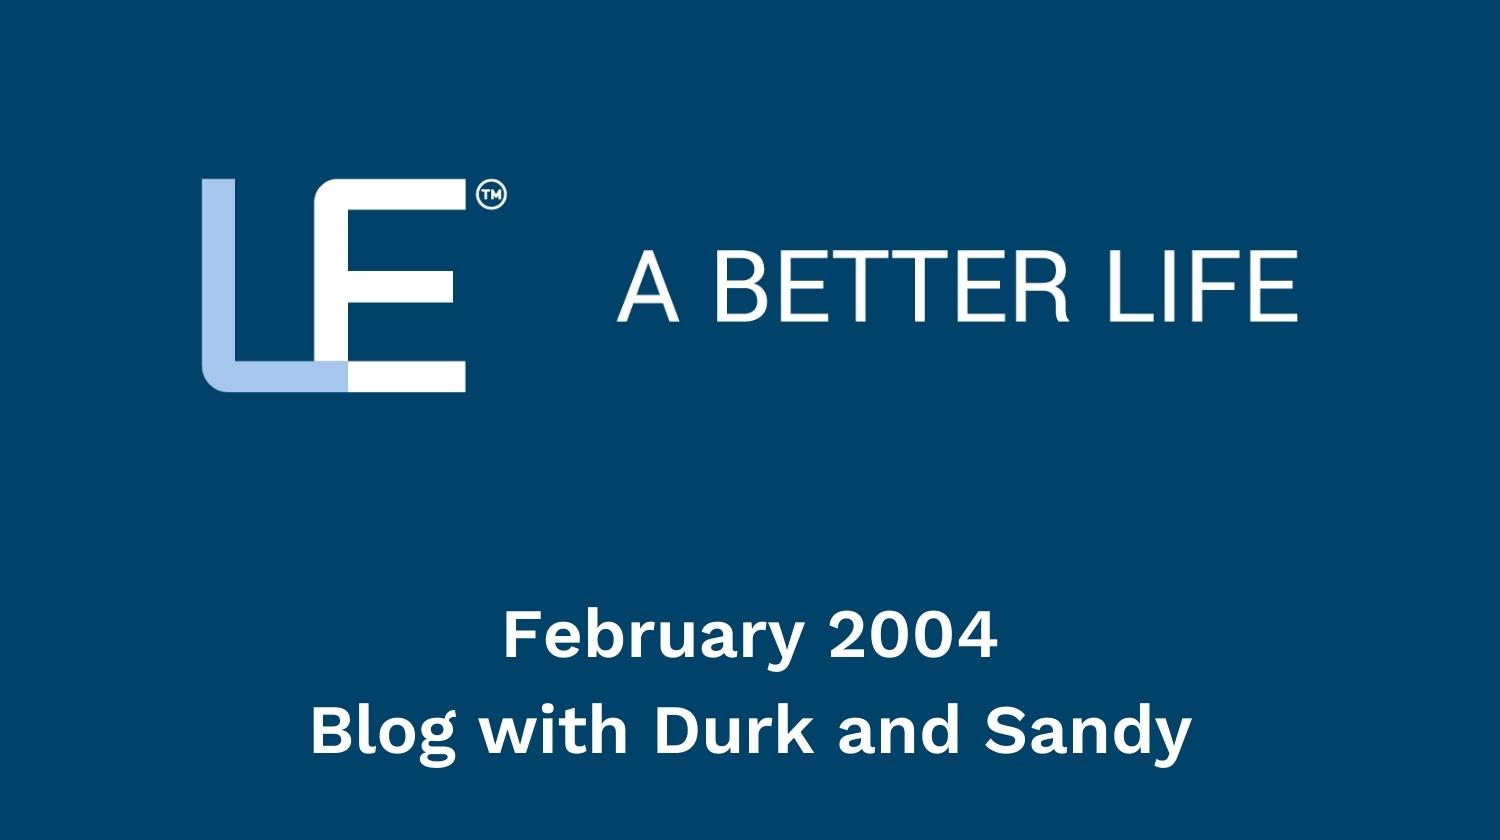 February 2004 Blog with Durk and Sandy